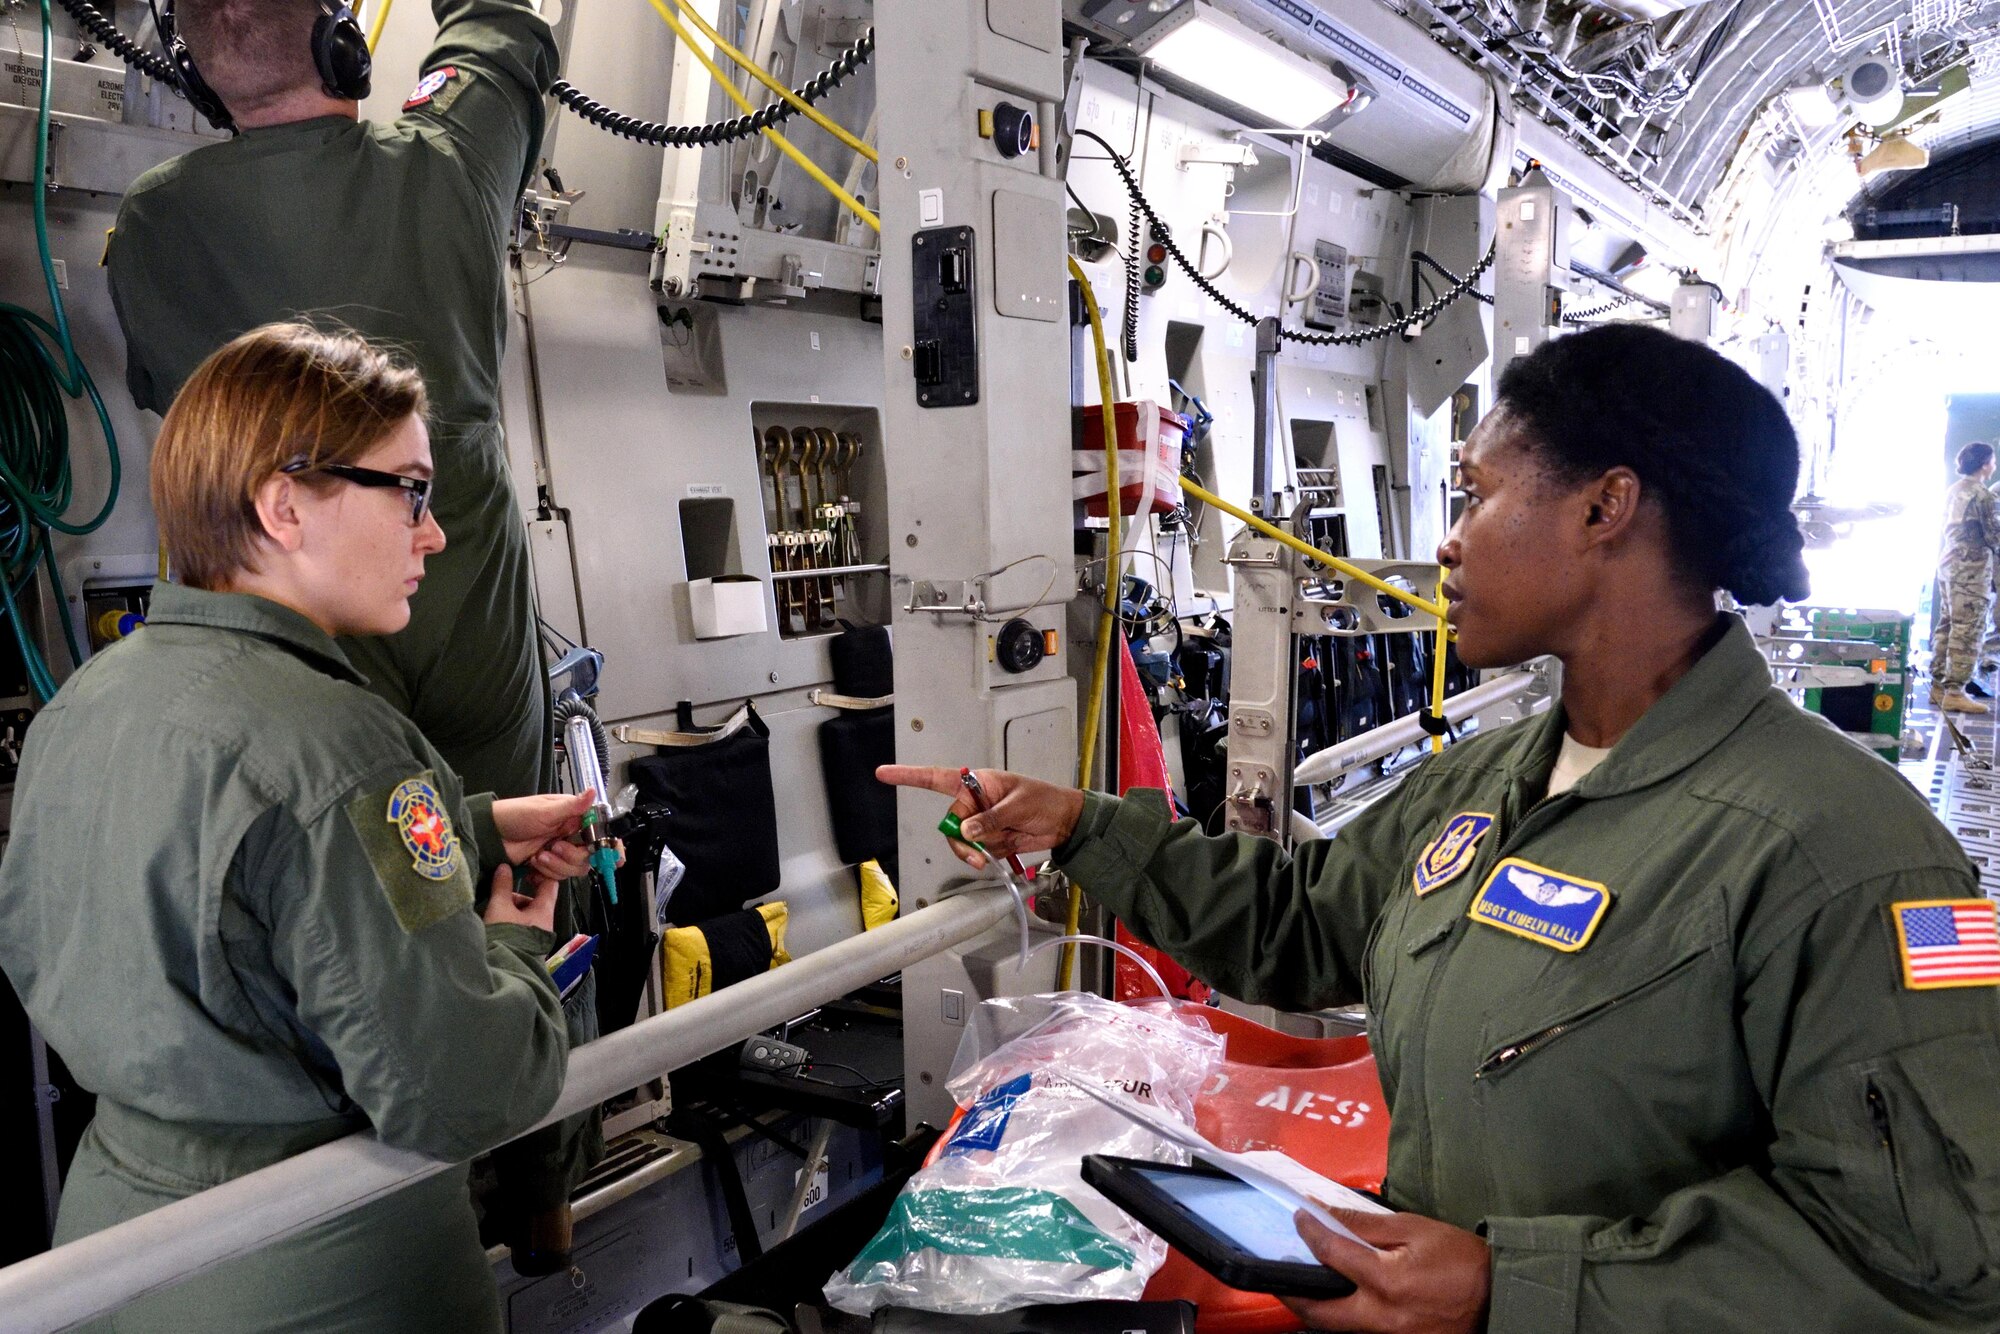 Master Sgt. Kimelyn Hall (right), 36th Aeromedical Evacuation Squadron aeromedical evacuation technician, works with other aeromedical evacuation members form Air National Guard units to prepare a C-17 Globemaster III aircraft for receiving simulated patients during Southern Strike 2018 at the Gulfport Combat Readiness Training Center, Mississippi, Oct. 30, 2017. Southern Strike 2018 is a large-scale, joint multinational combat exercise that provides tactical level training for the full spectrum of conflict and emphasizes air dominance, maritime operations, maritime air support, precision engagement, close air support, command and control, personnel recovery, aeromedical evacuation, and combat medical support. (U.S. Air Force photo by Tech. Sgt. Ryan Labadens)